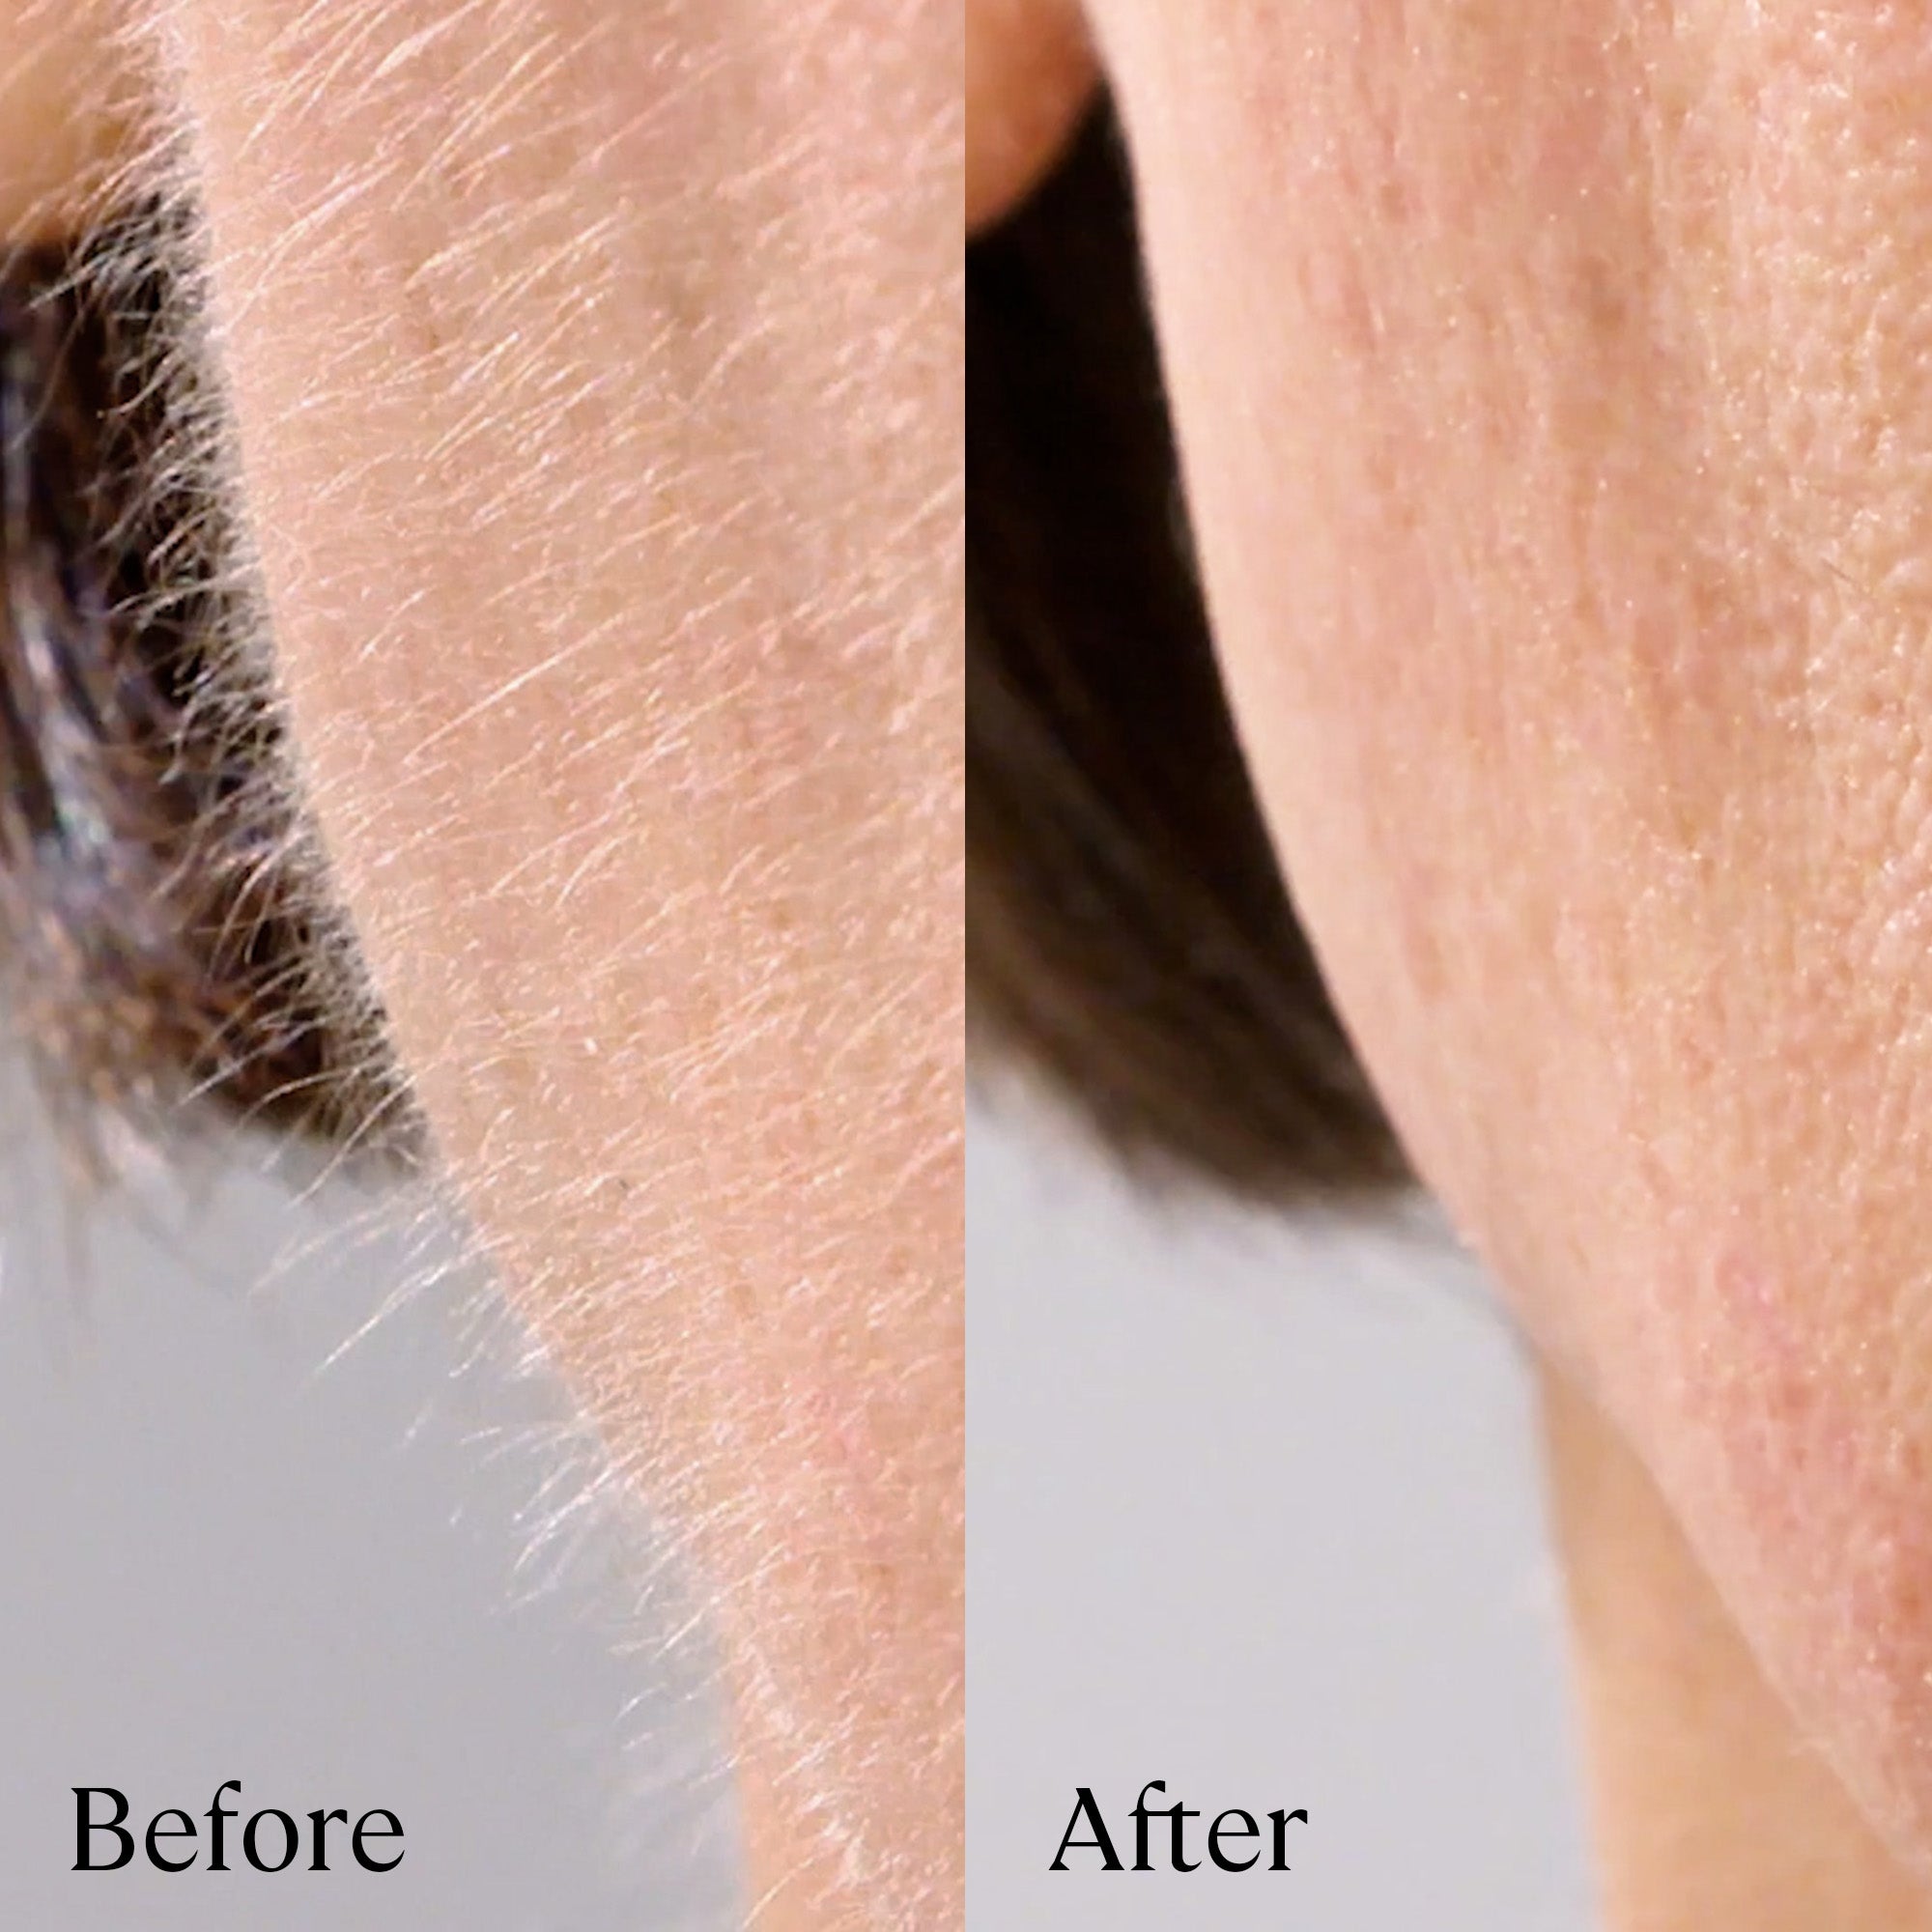 White . Close-up comparison of a woman's face before and after using Michael Todd Beauty's 4 in 1 Dermaplaning & Post Treatment System, showing dull and fuzzy skin versus smooth and glowy skin.